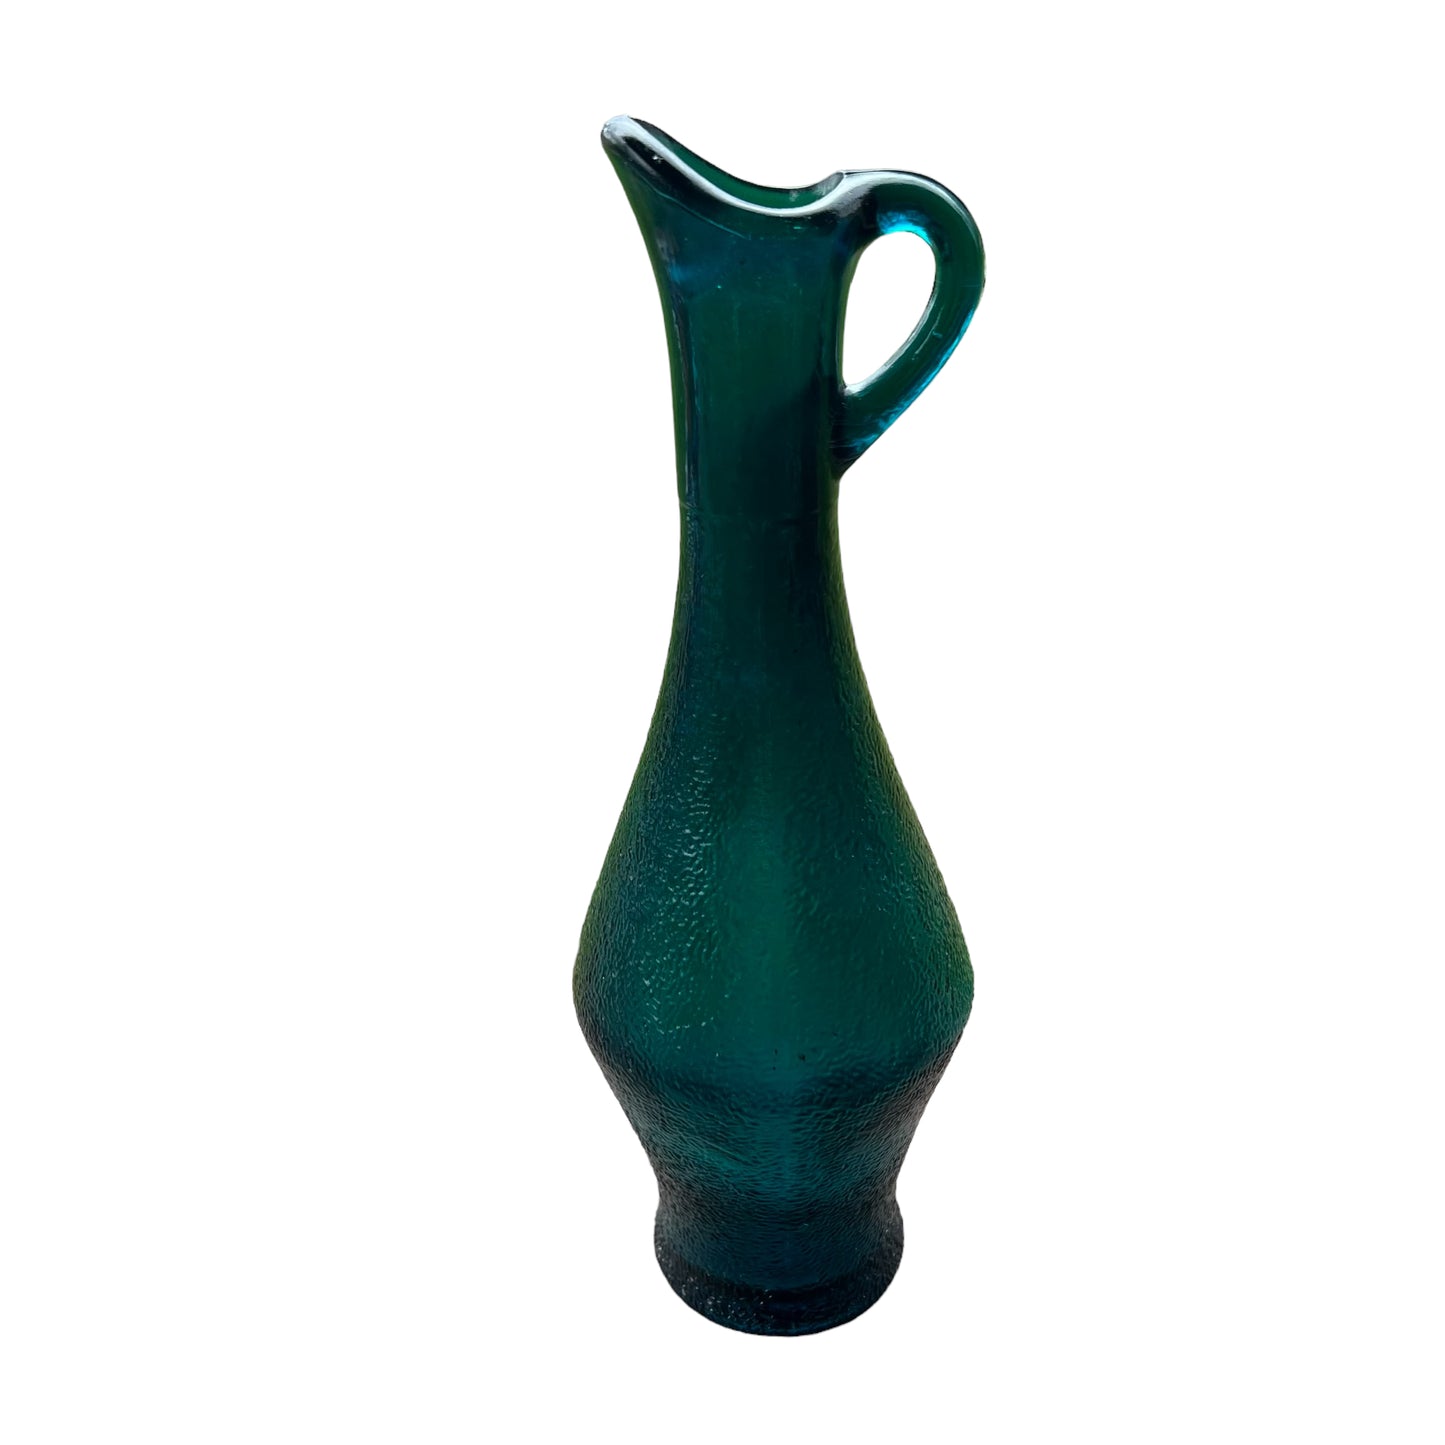 Vintage MCM turquoise Green Pitcher